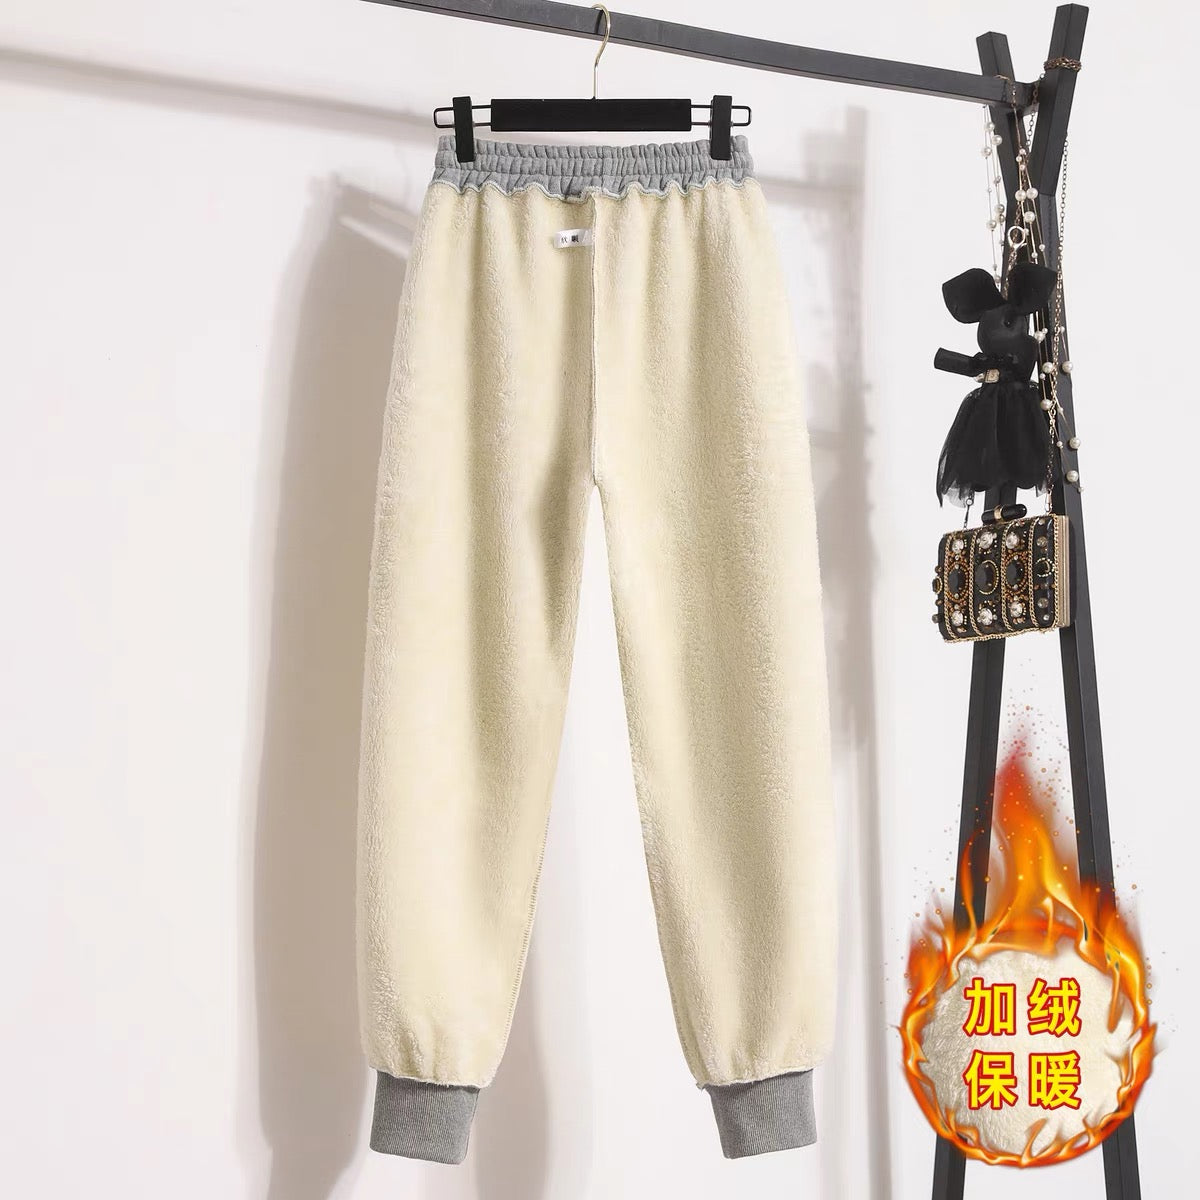 Grey sports pants women's loose-fitting casual pants 2022 new